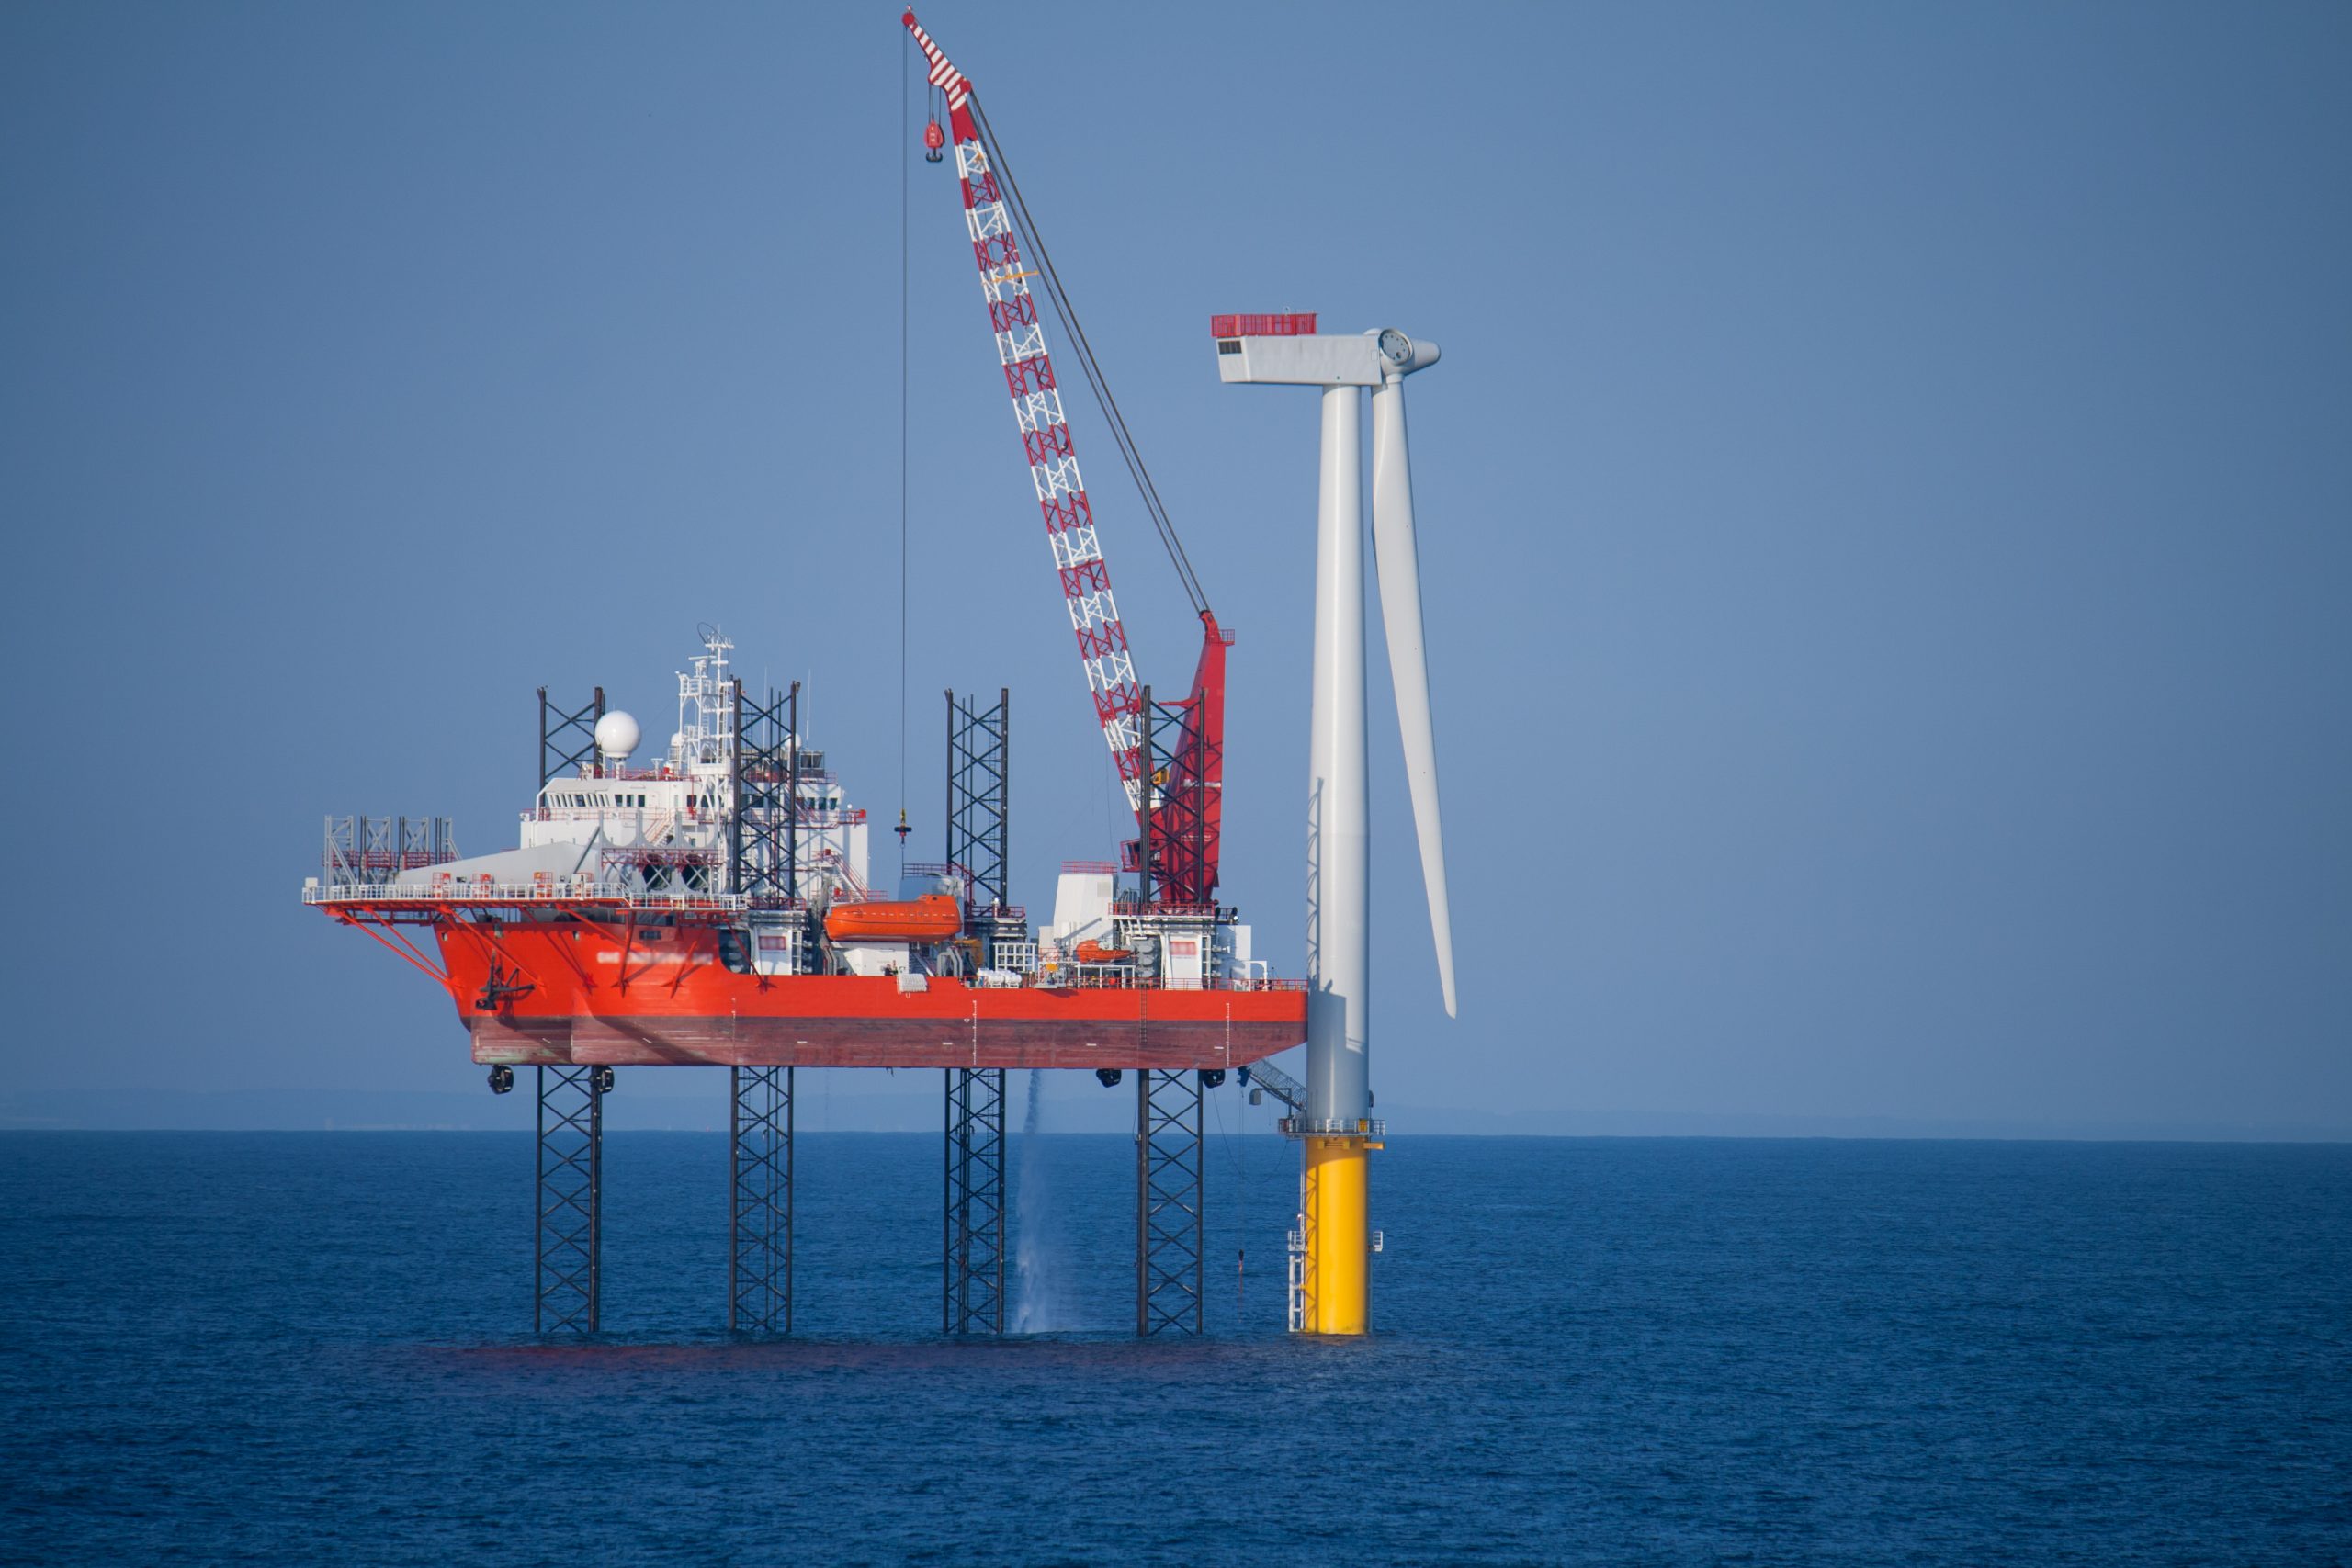 Offshore,Wind,Turbine,In,A,Windfarm,Under,Construction,Off,The